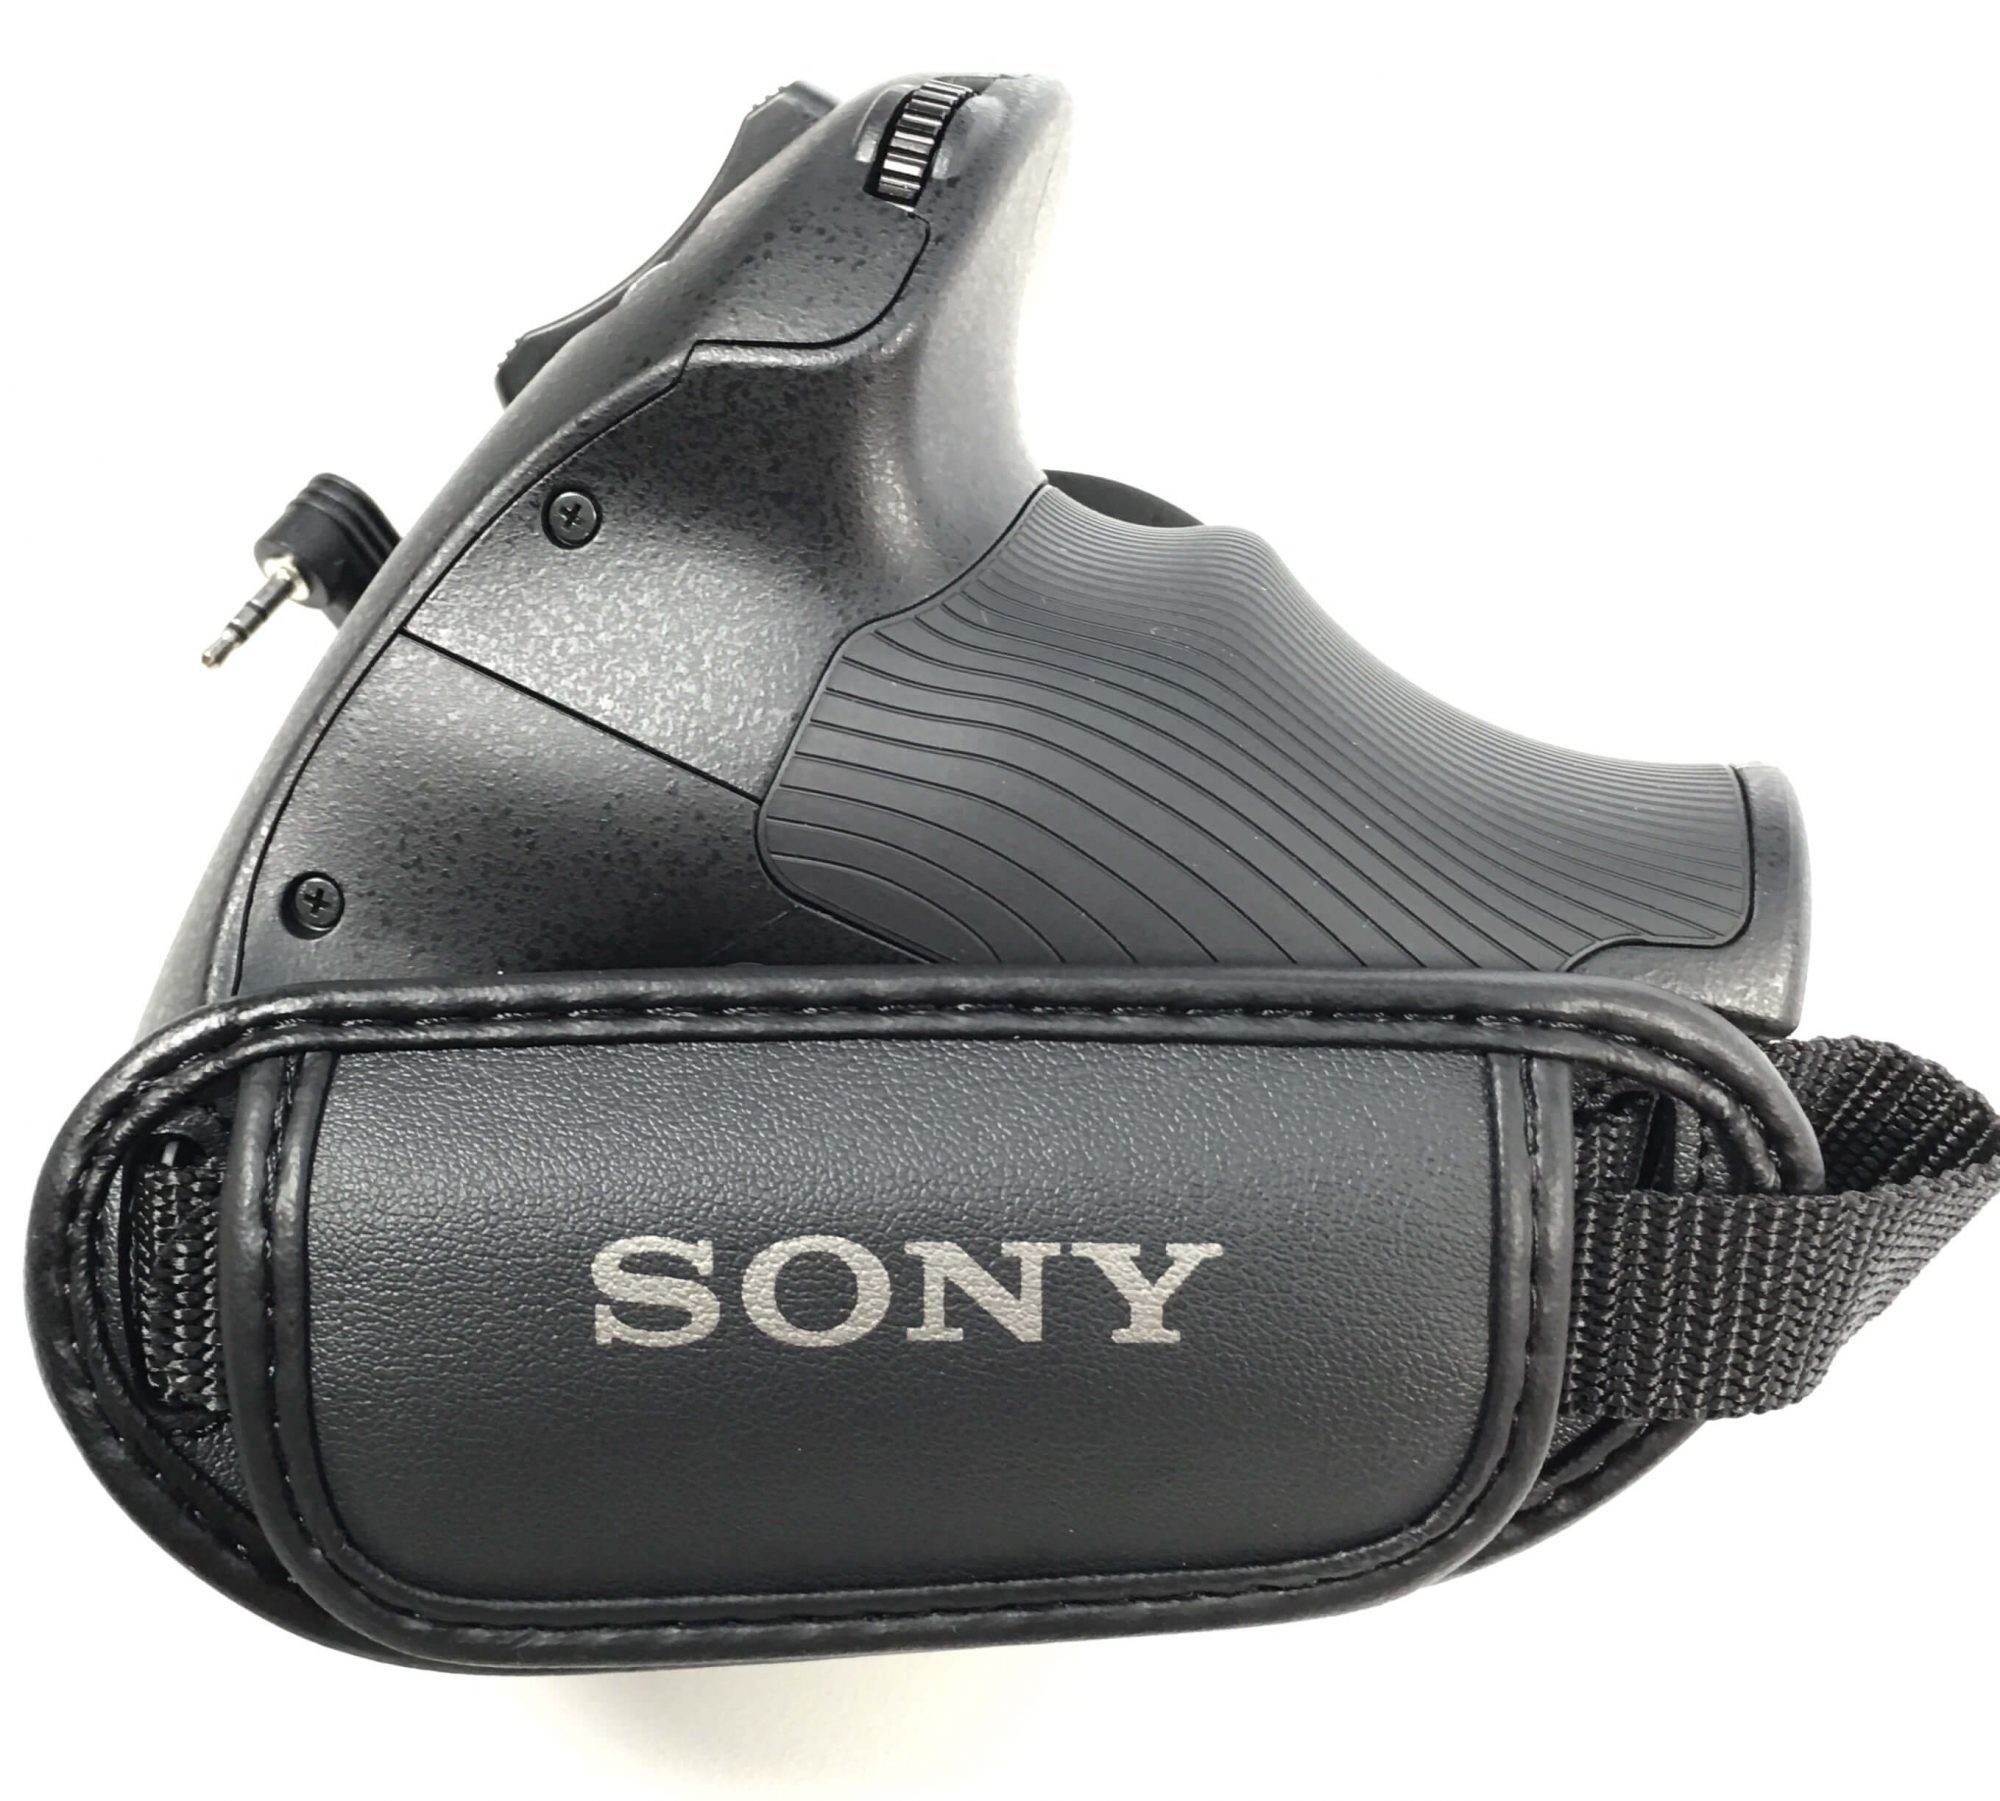 Original Sony PXW-FS5 Grip that fits on the the Sony PXW-FS5 camcorder. It is a genuine Sony part, sourced directly from Sony USA. Brand new factory fresh. Free Shipping.